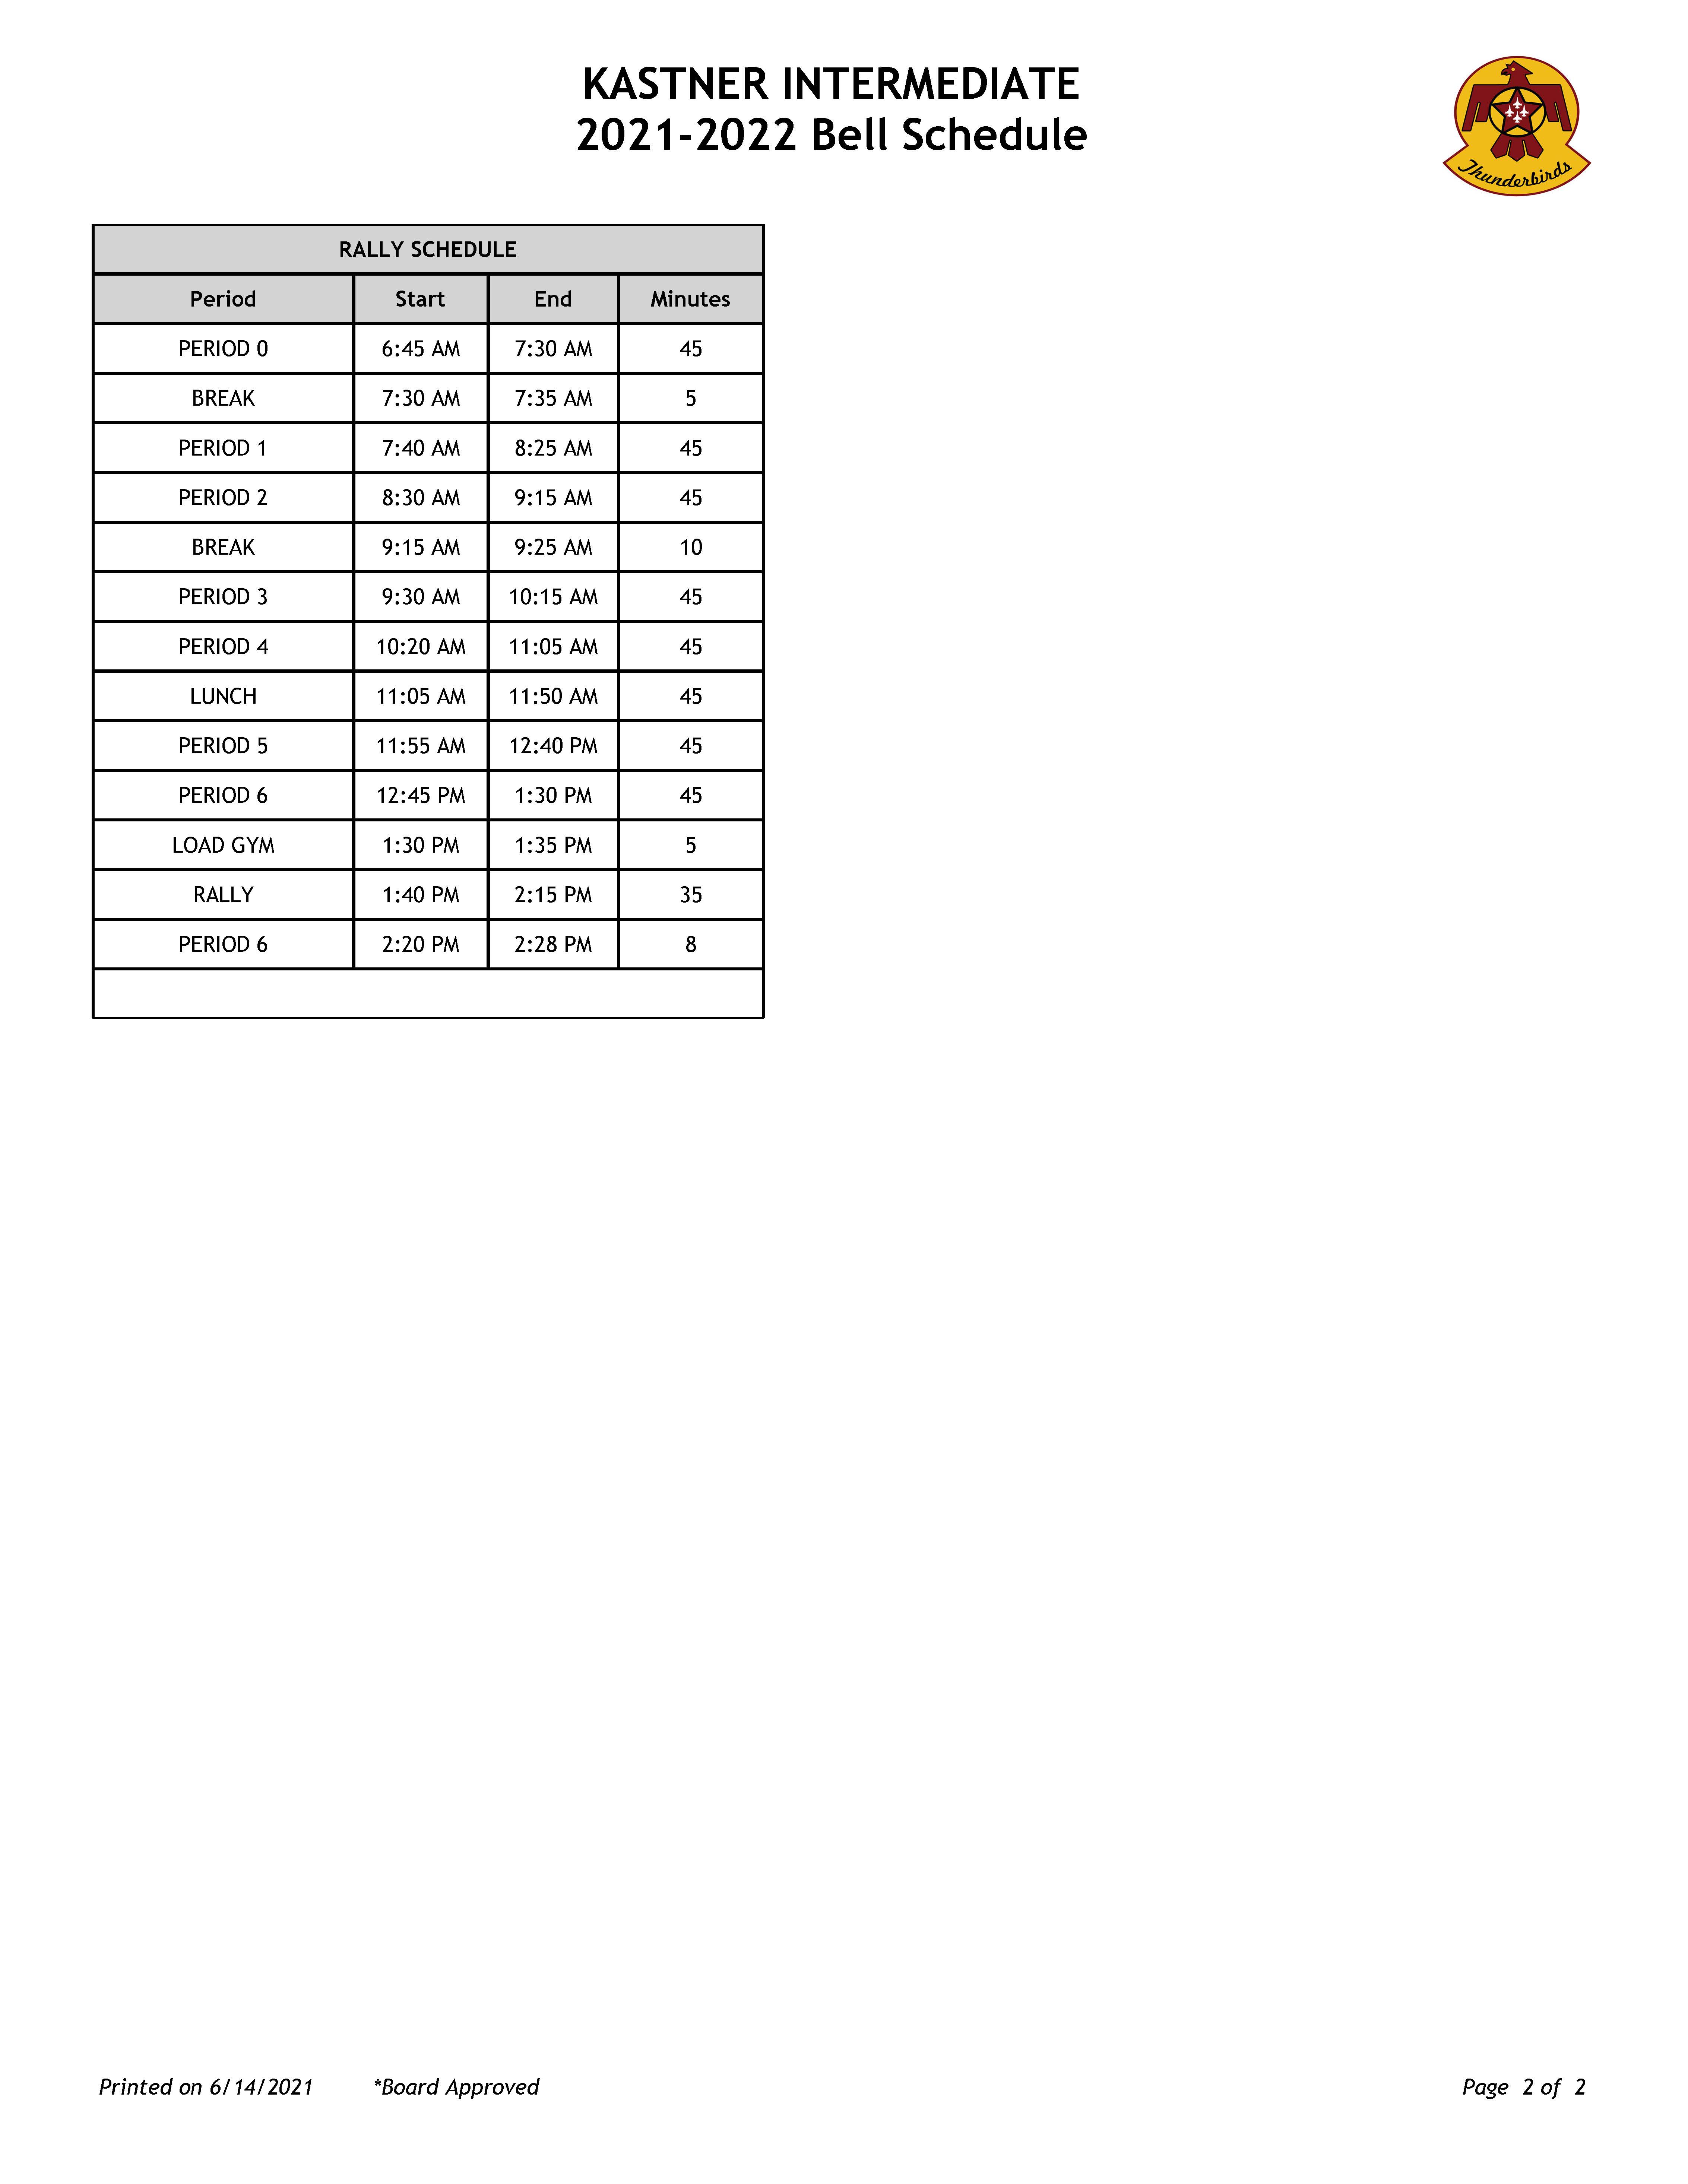 Bell schedule 21-22 page 2